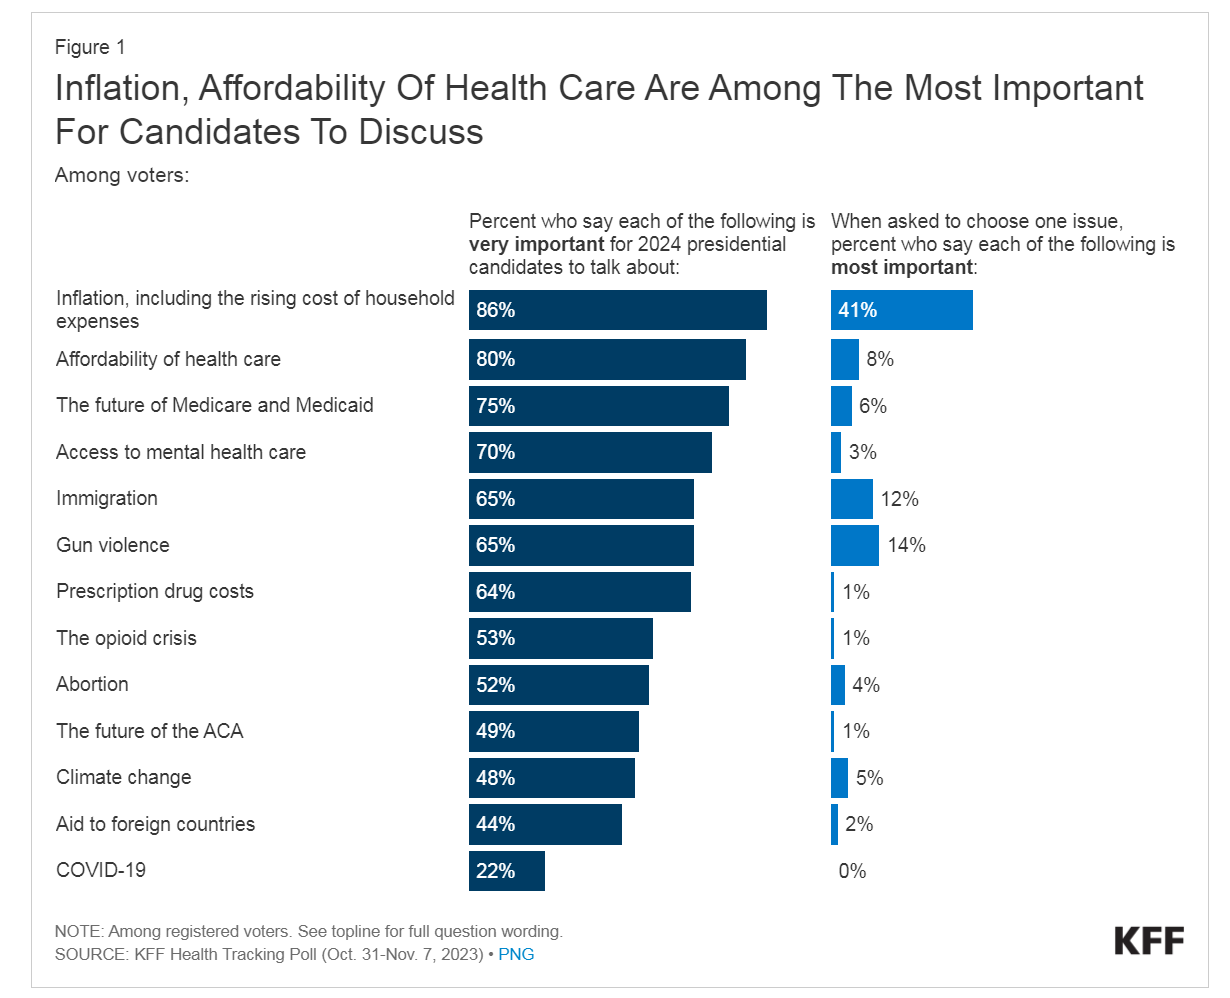 Inflation and the cost of health care top U.S. voters' issues for 2024